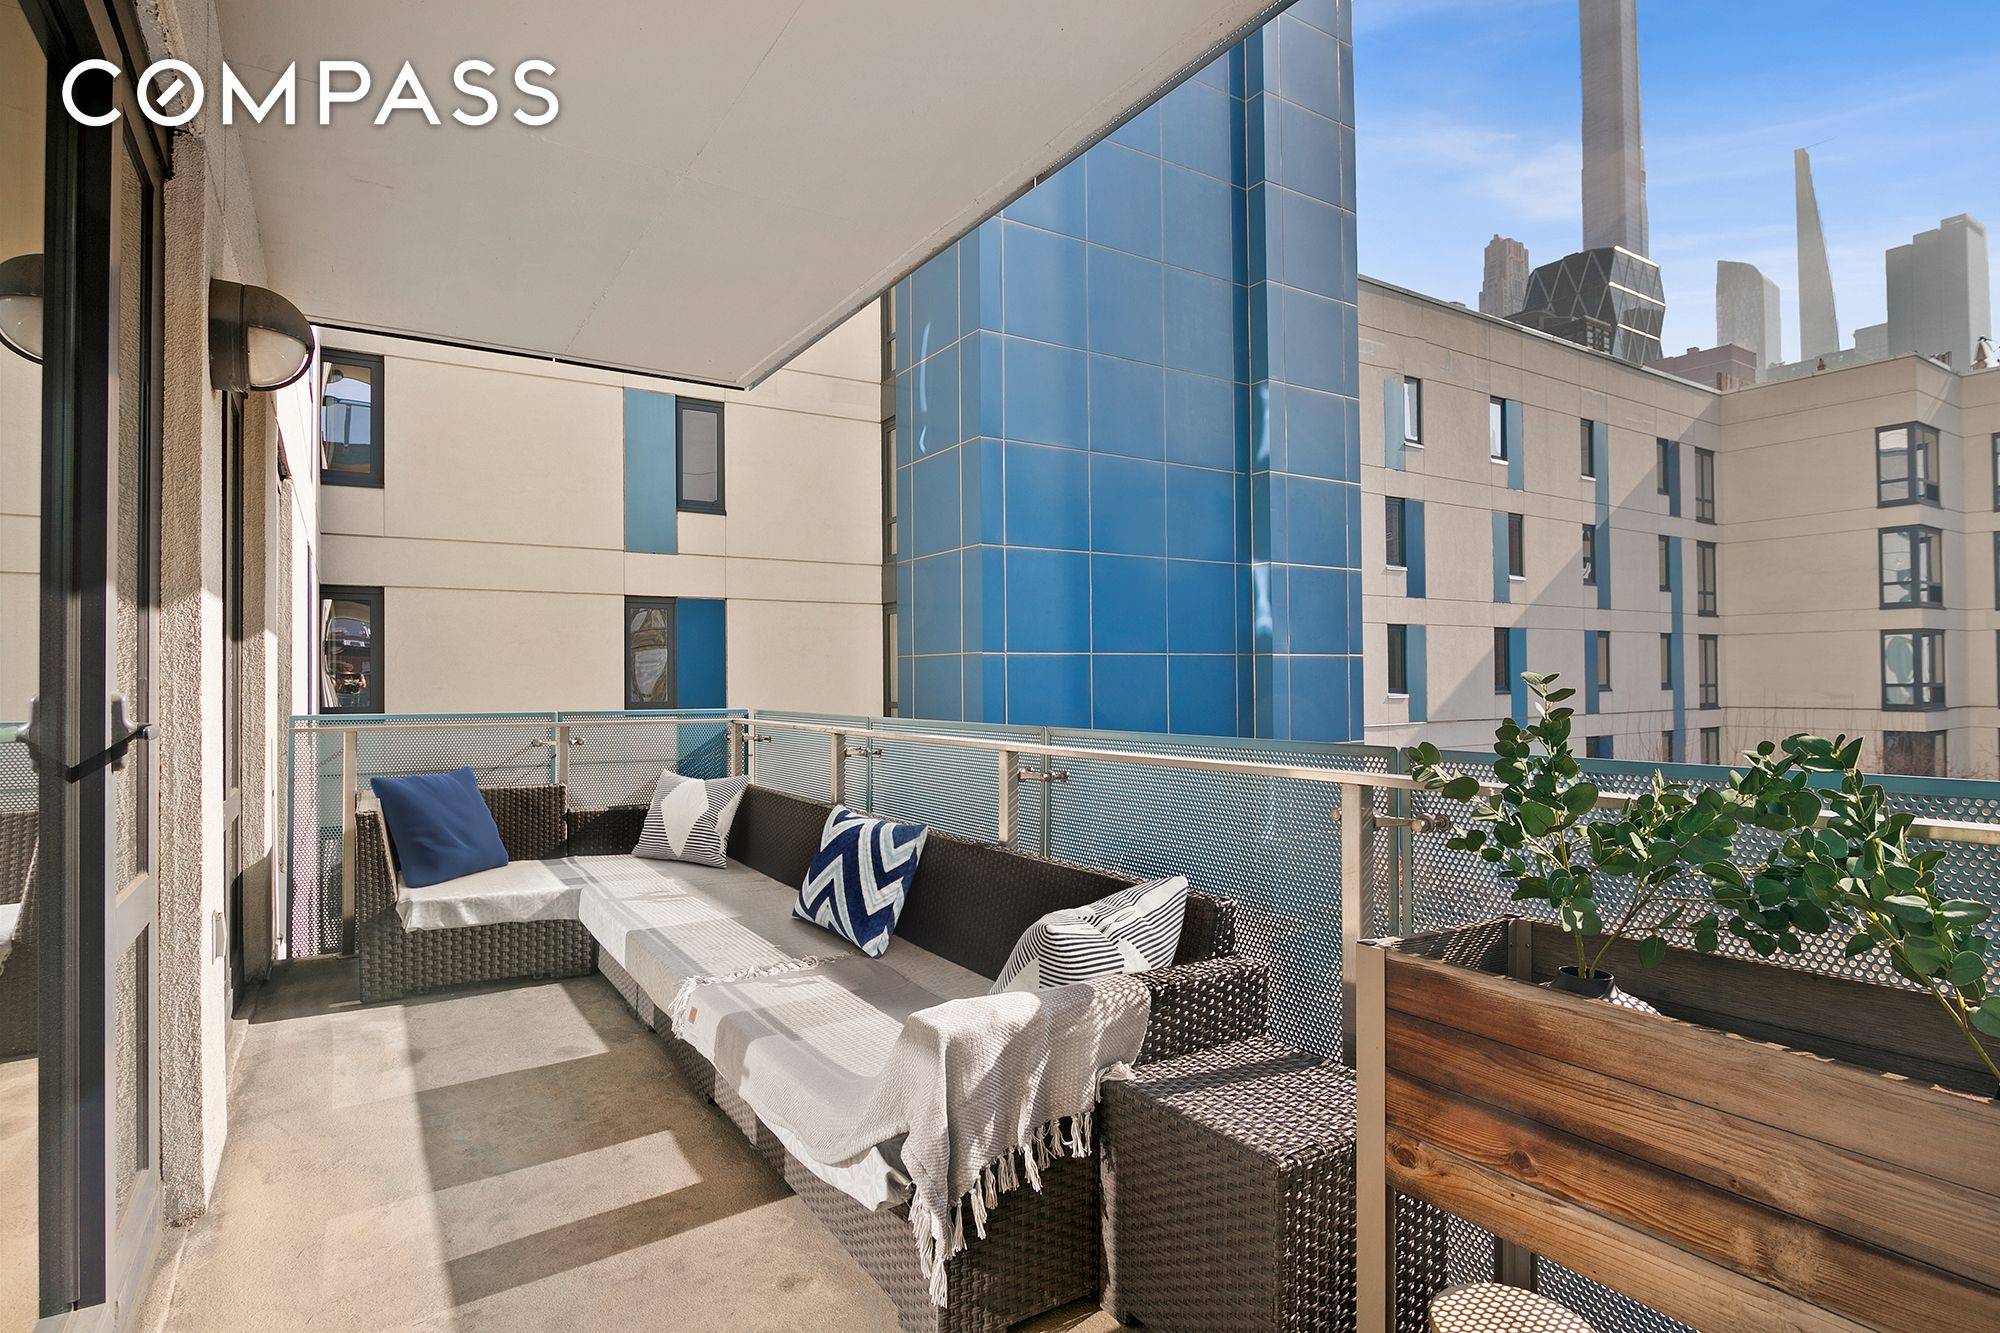 Enjoy the outdoors from your expansive private balcony 3x larger than most balconies in the building and make this 2 Bedroom 2 Bath your new oasis !